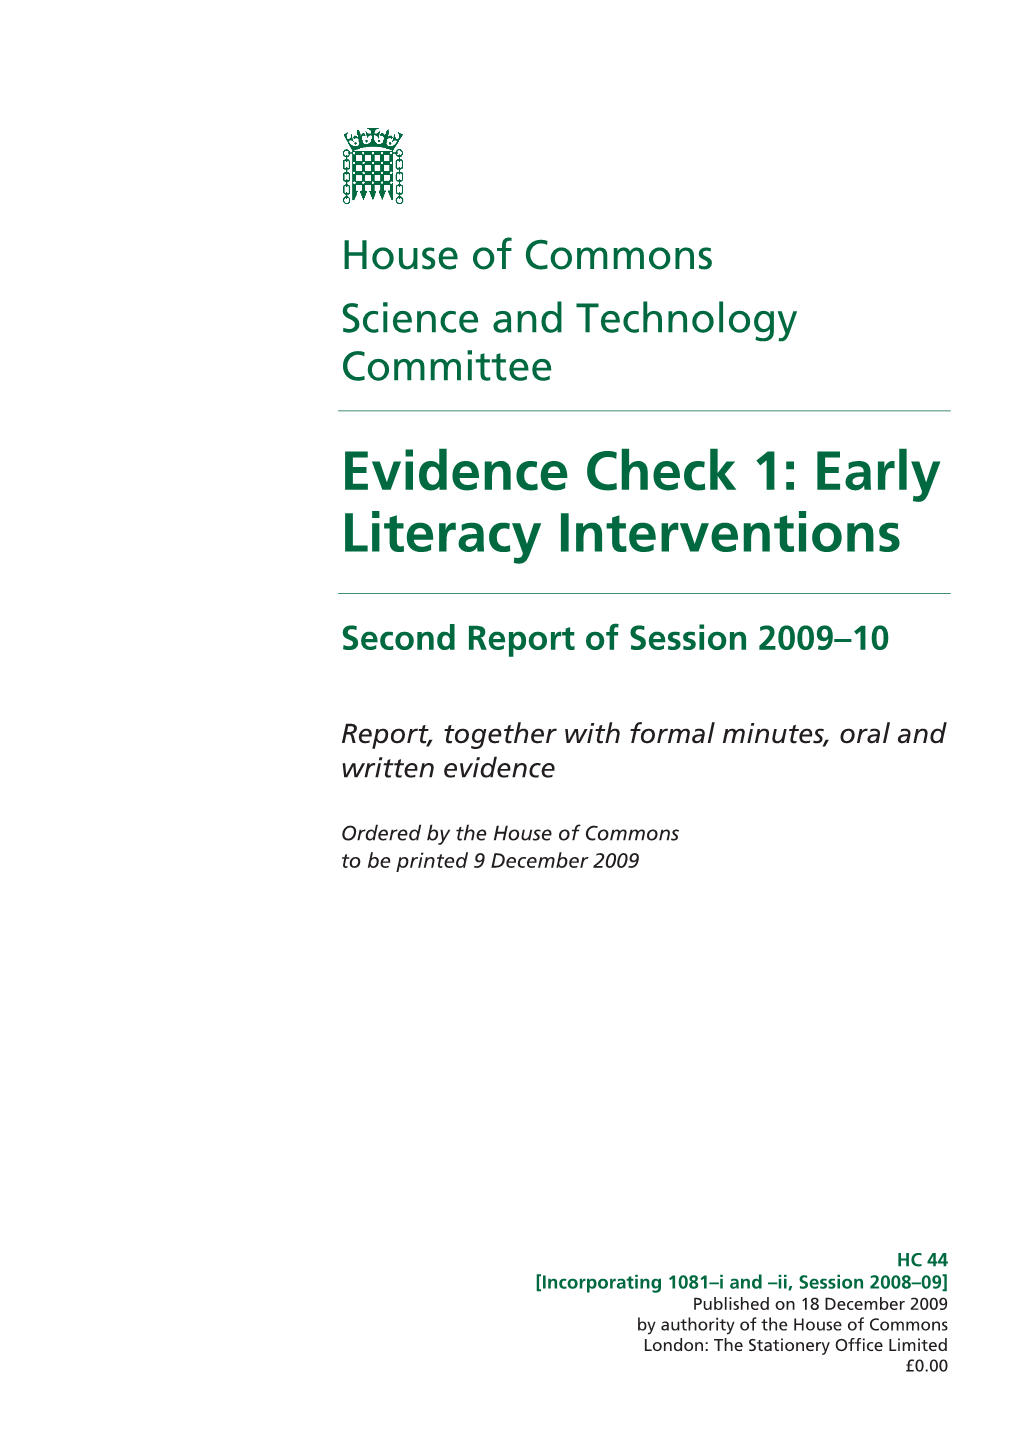 Early Literacy Interventions